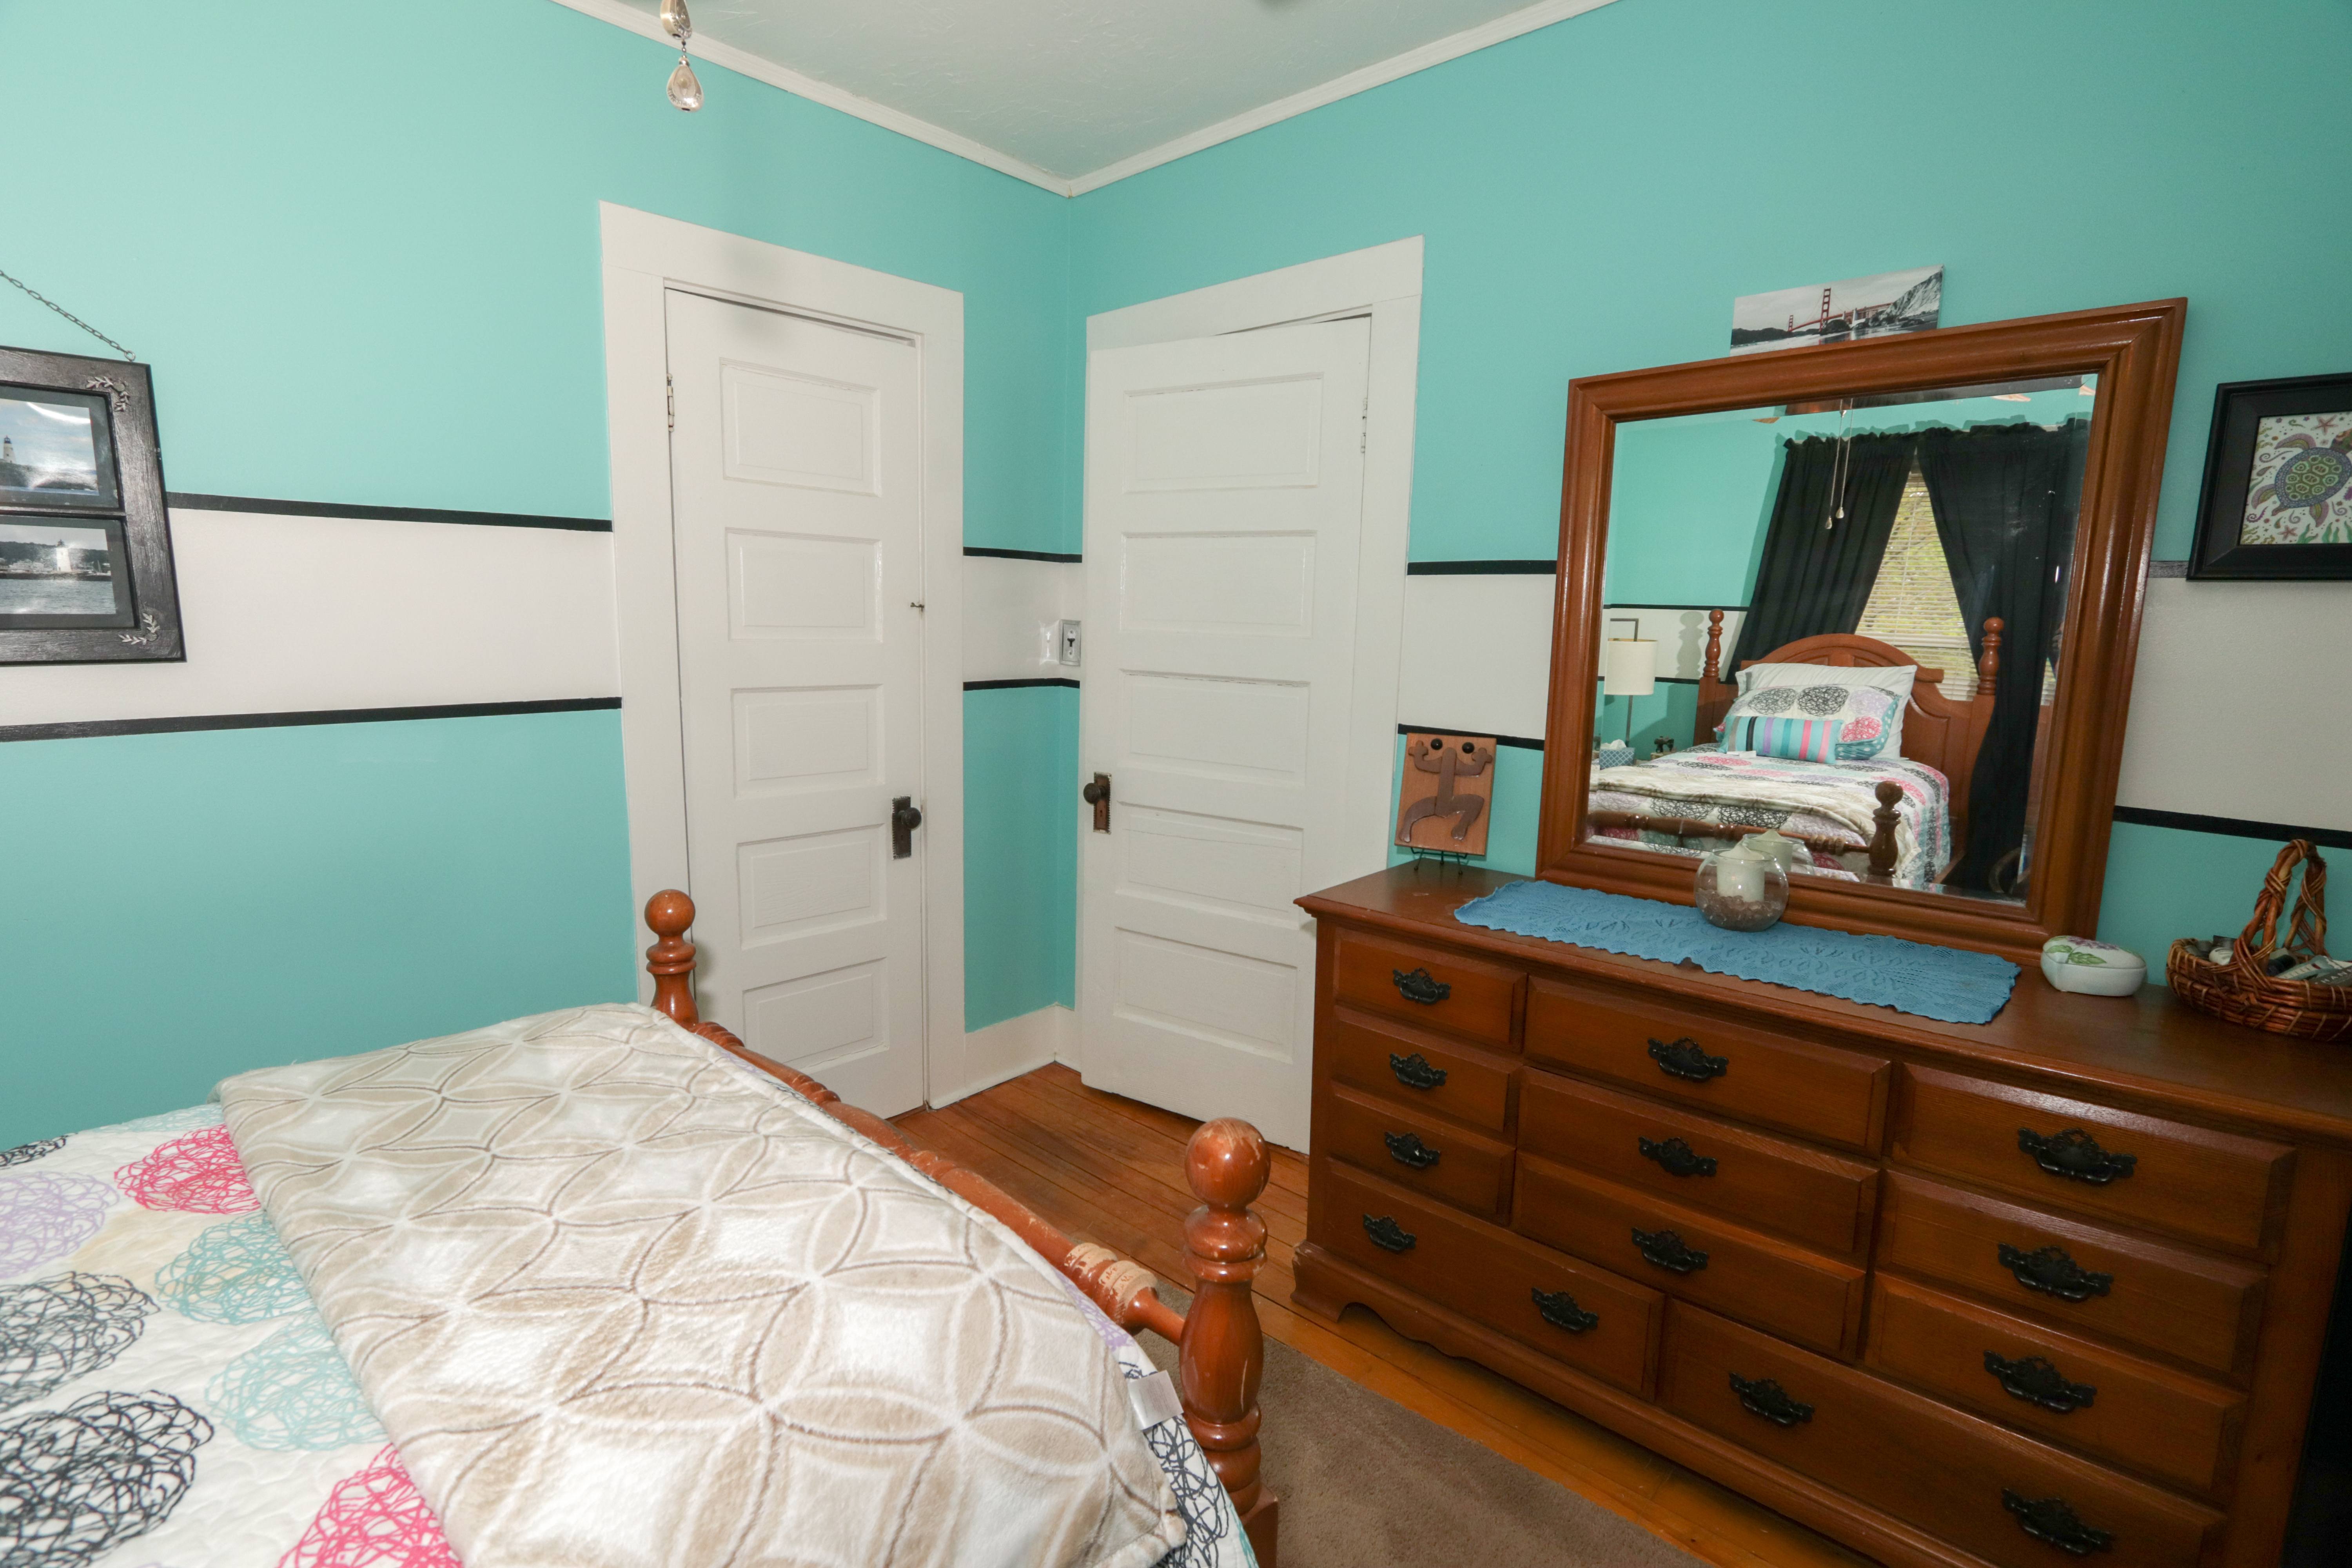 South Nashua House for Sale 34.5 Russell Ave Nashua NH 03060 bedroom 4